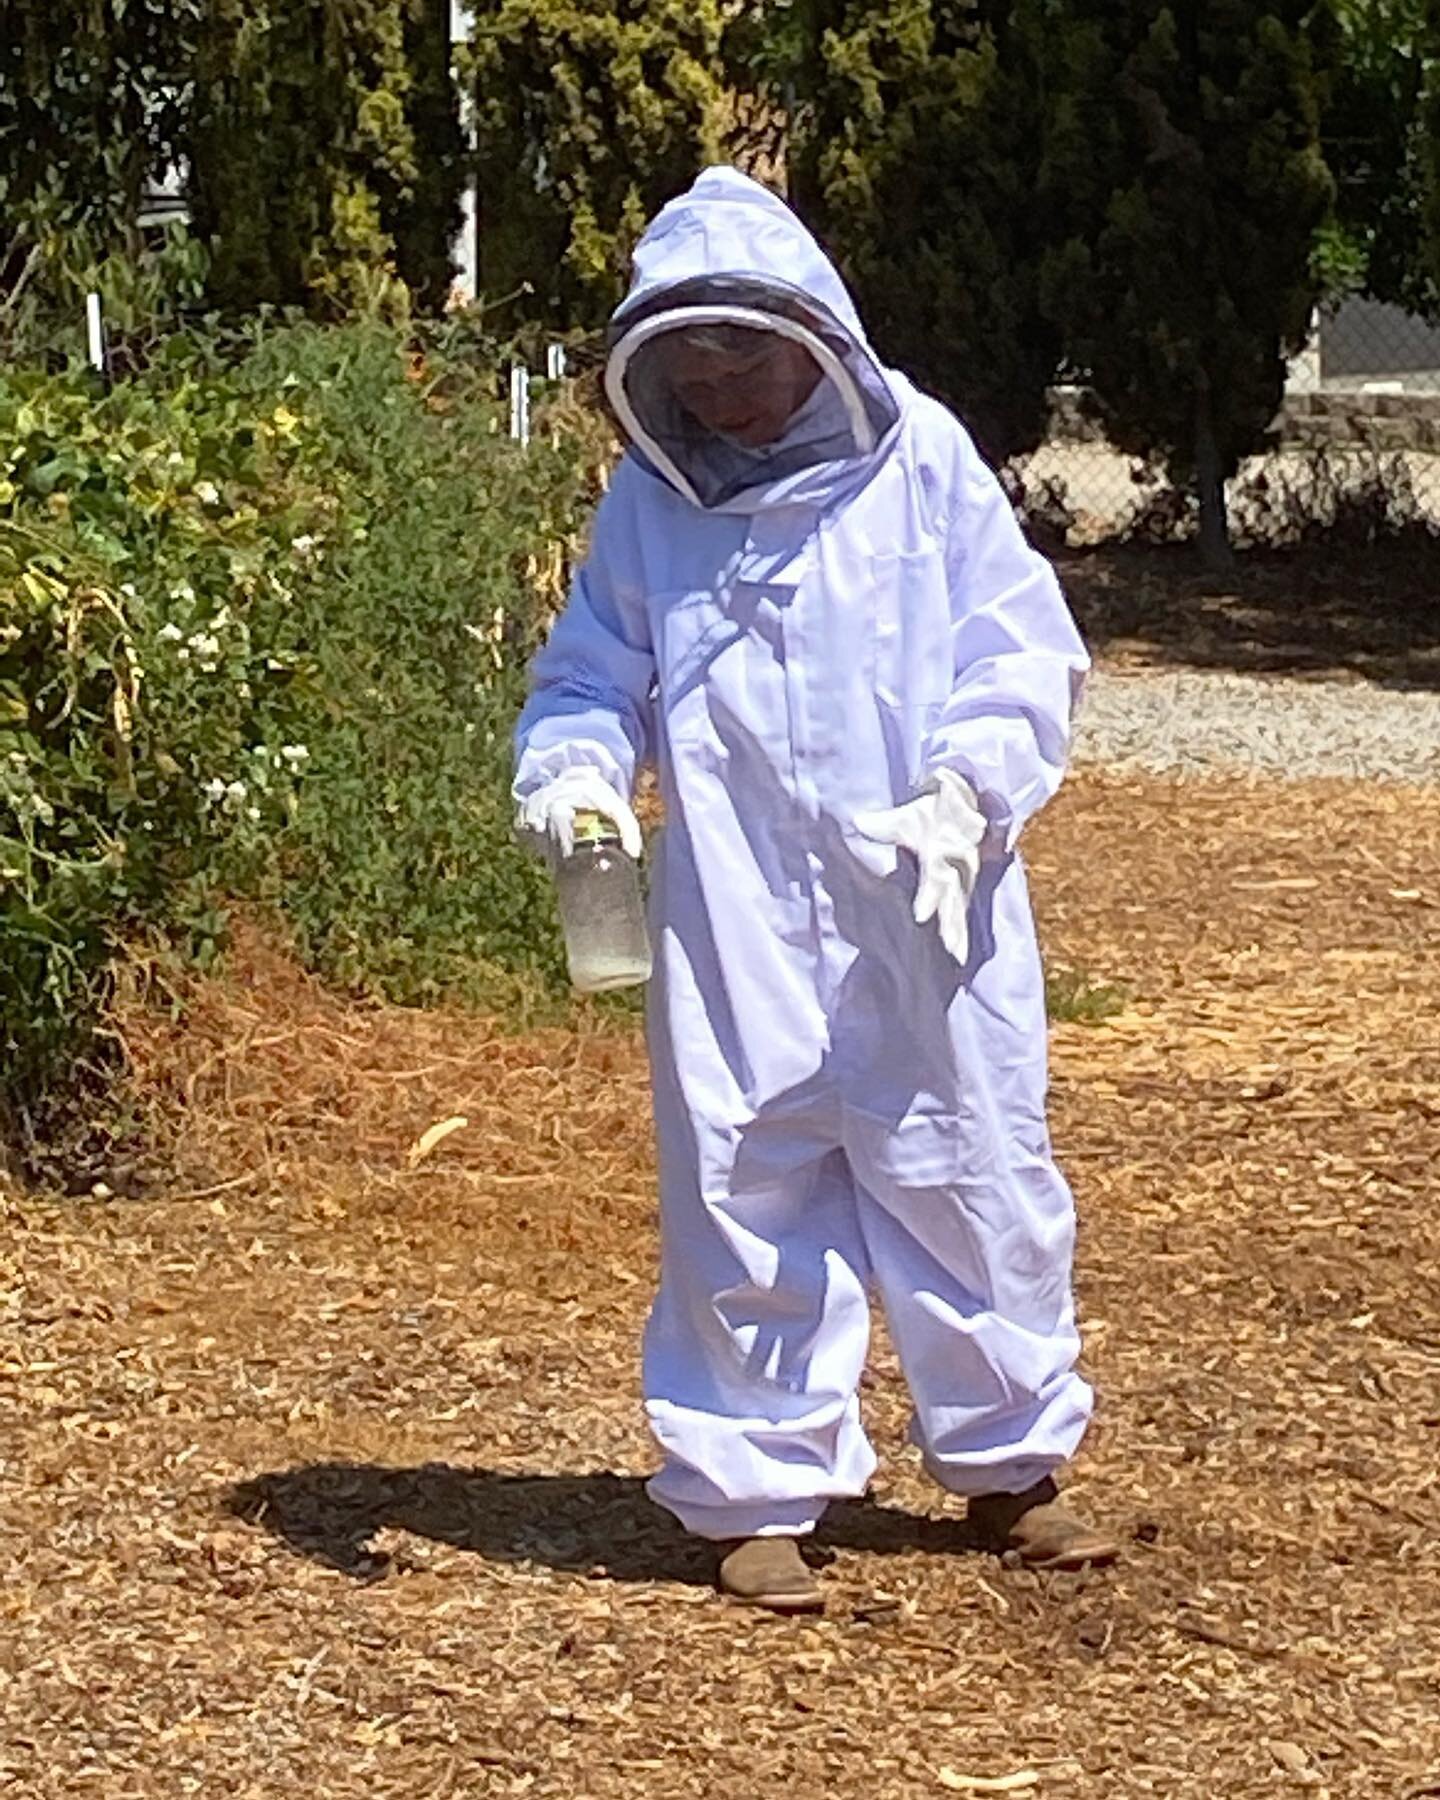 Despite being in a September heat wave here @mulberrylanefarm.somis, Karen Meier dons her new bee suit and feeds the bees a concoction of sugar and water to supplement the nectar found in our blossoms!  Our bee 🐝 hives&hellip;including our new @flow